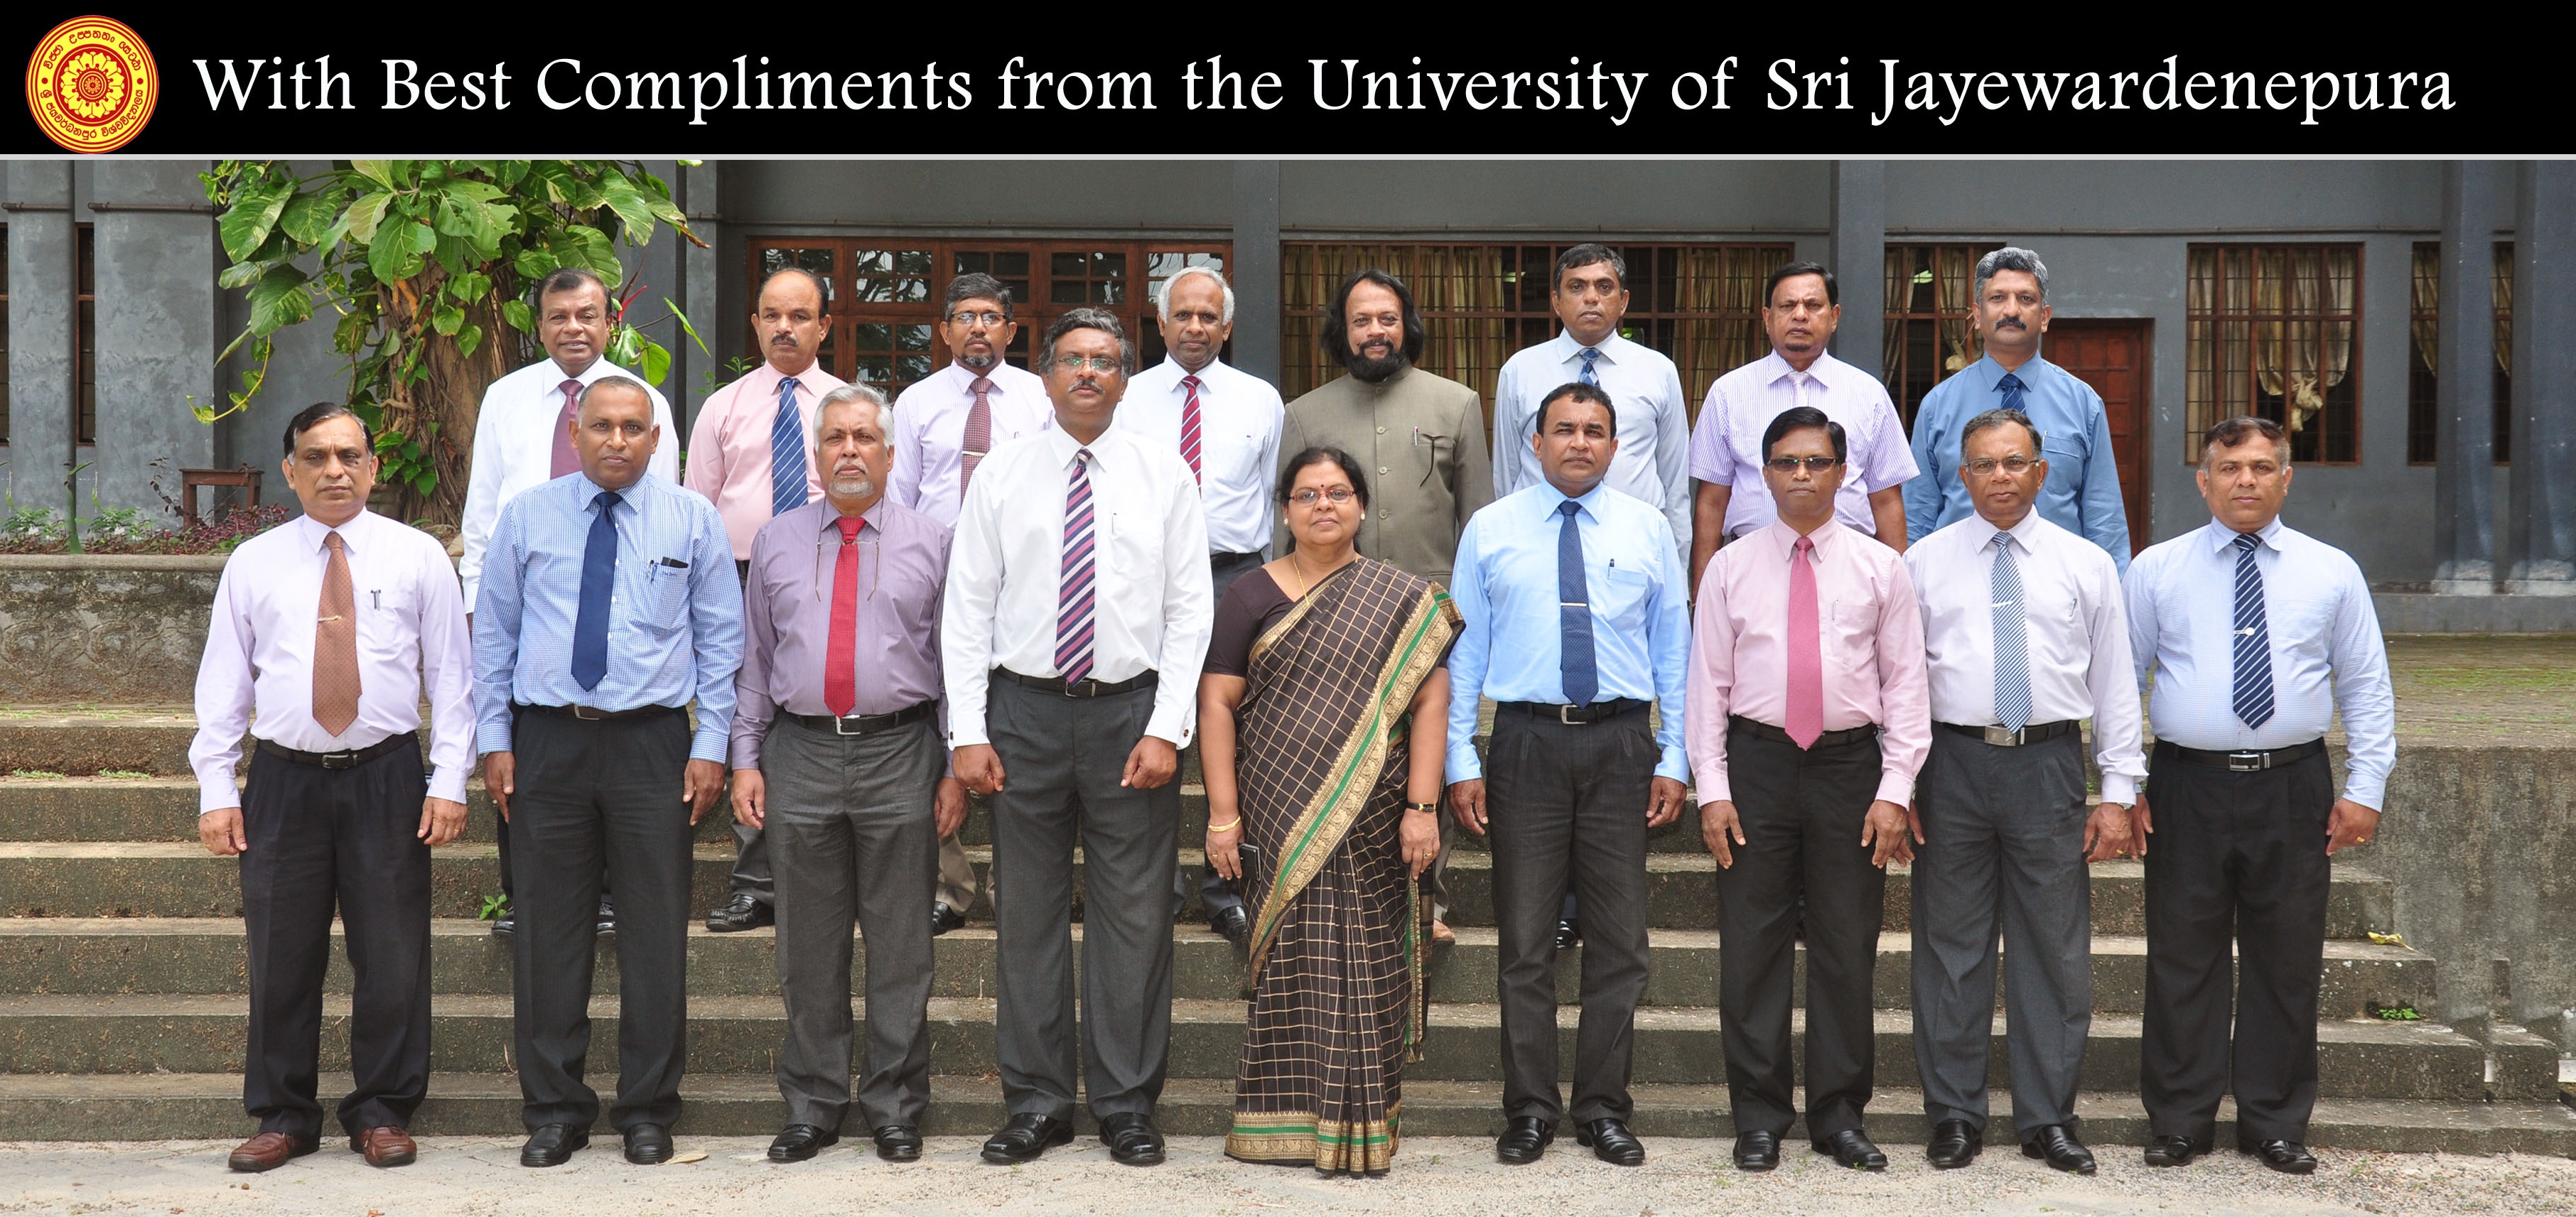 Committee of Vice-Chancellors and Directors" (CVCD) meeting group photo